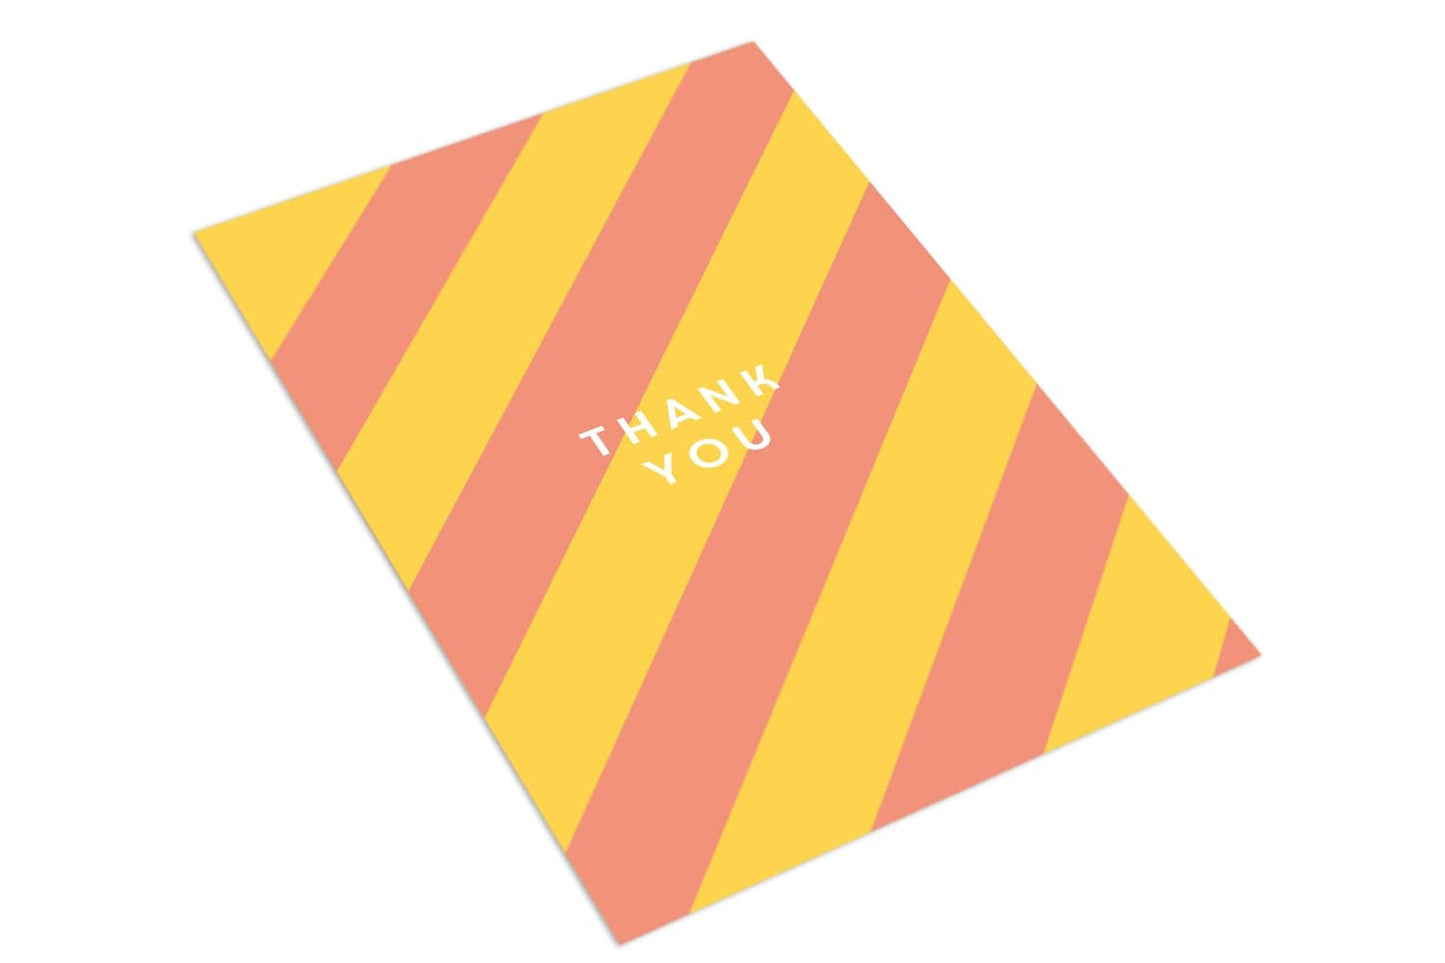 Thank You Candy - The Paper People Greeting Cards